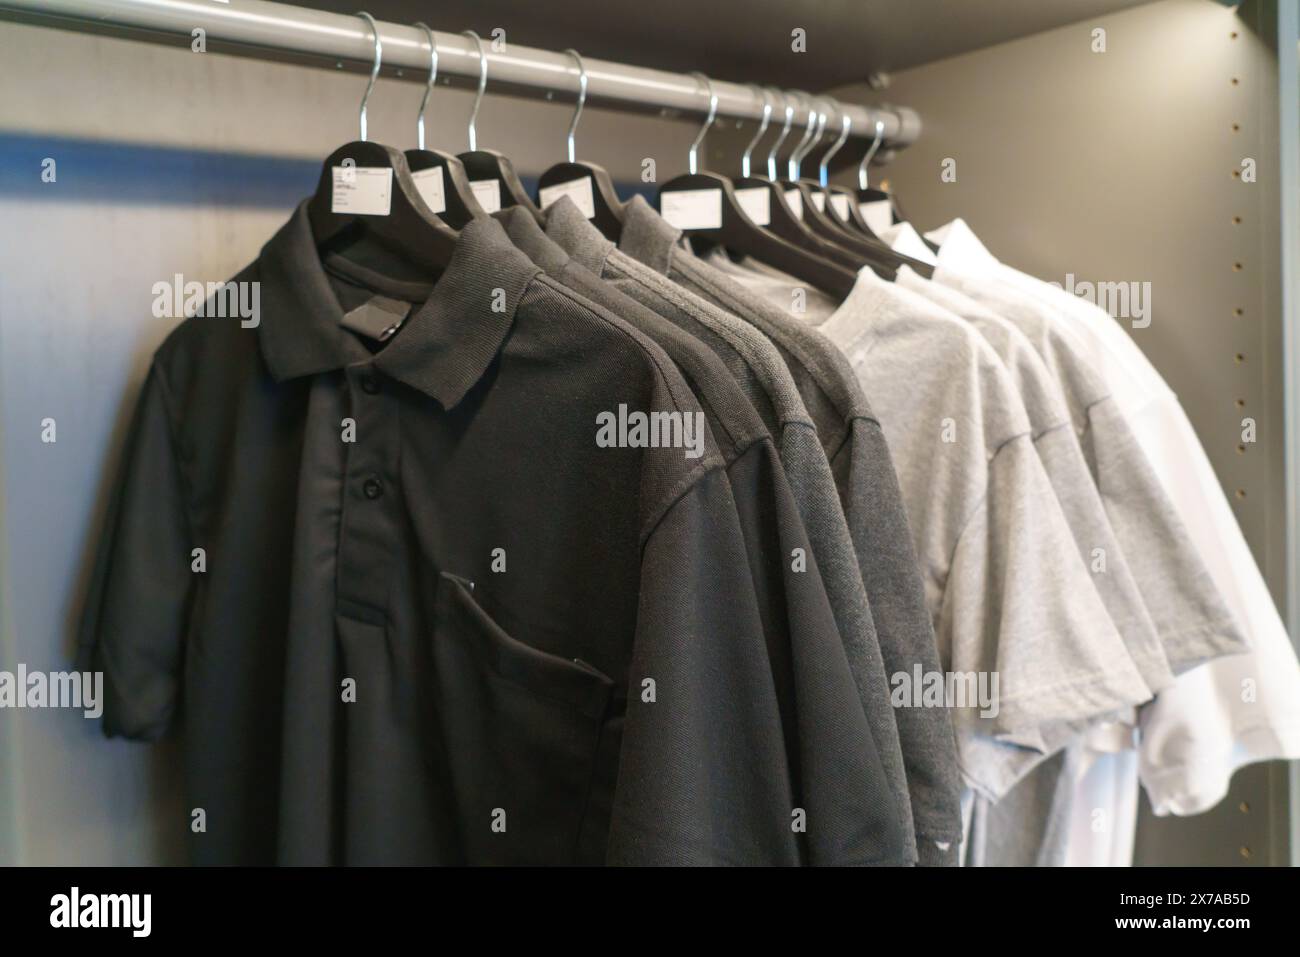 Neatly organized closet featuring a collection of men's polo shirts Stock Photo